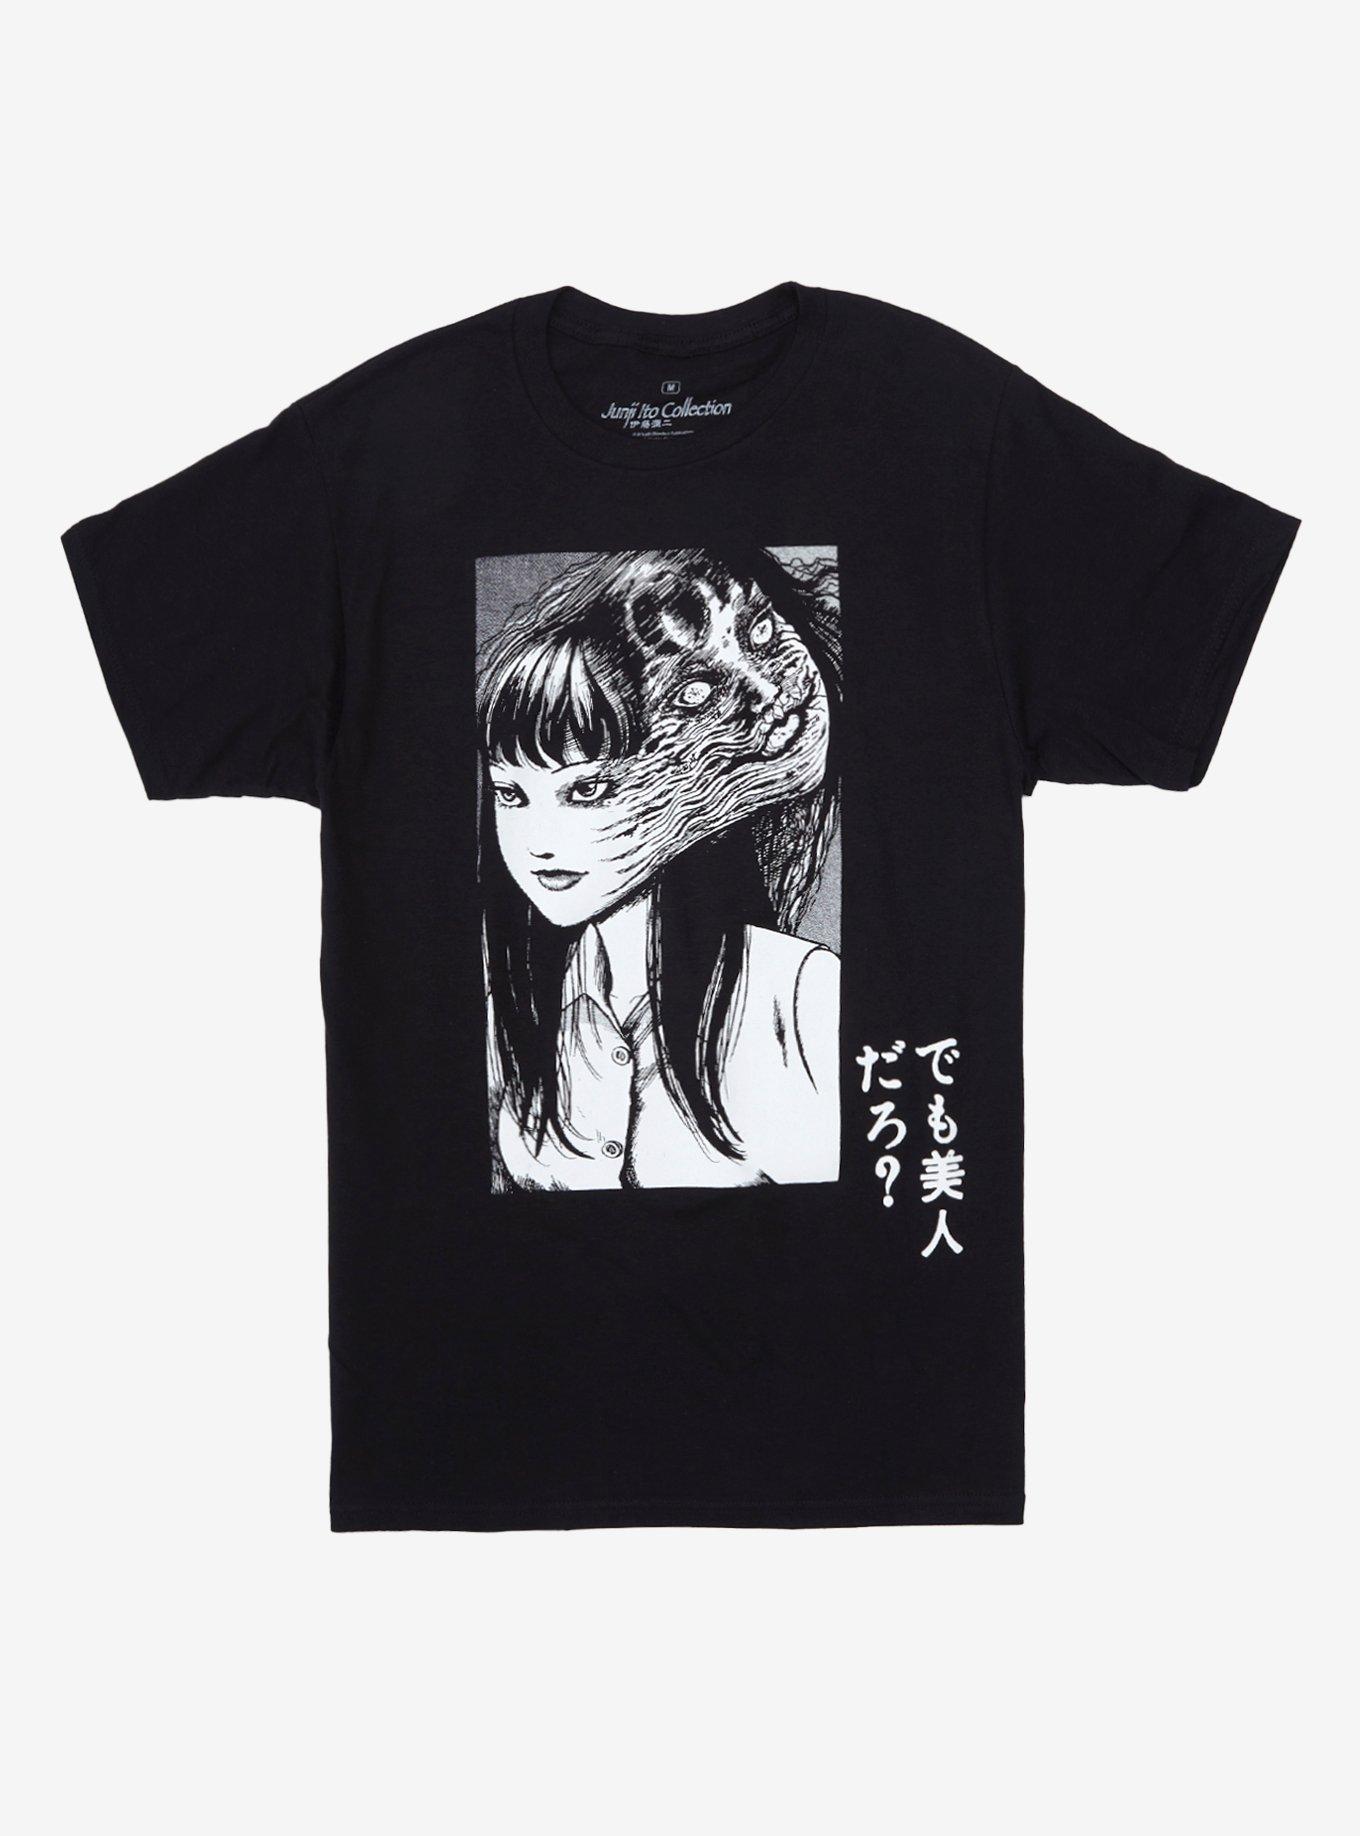 TOMIE by Junji Ito